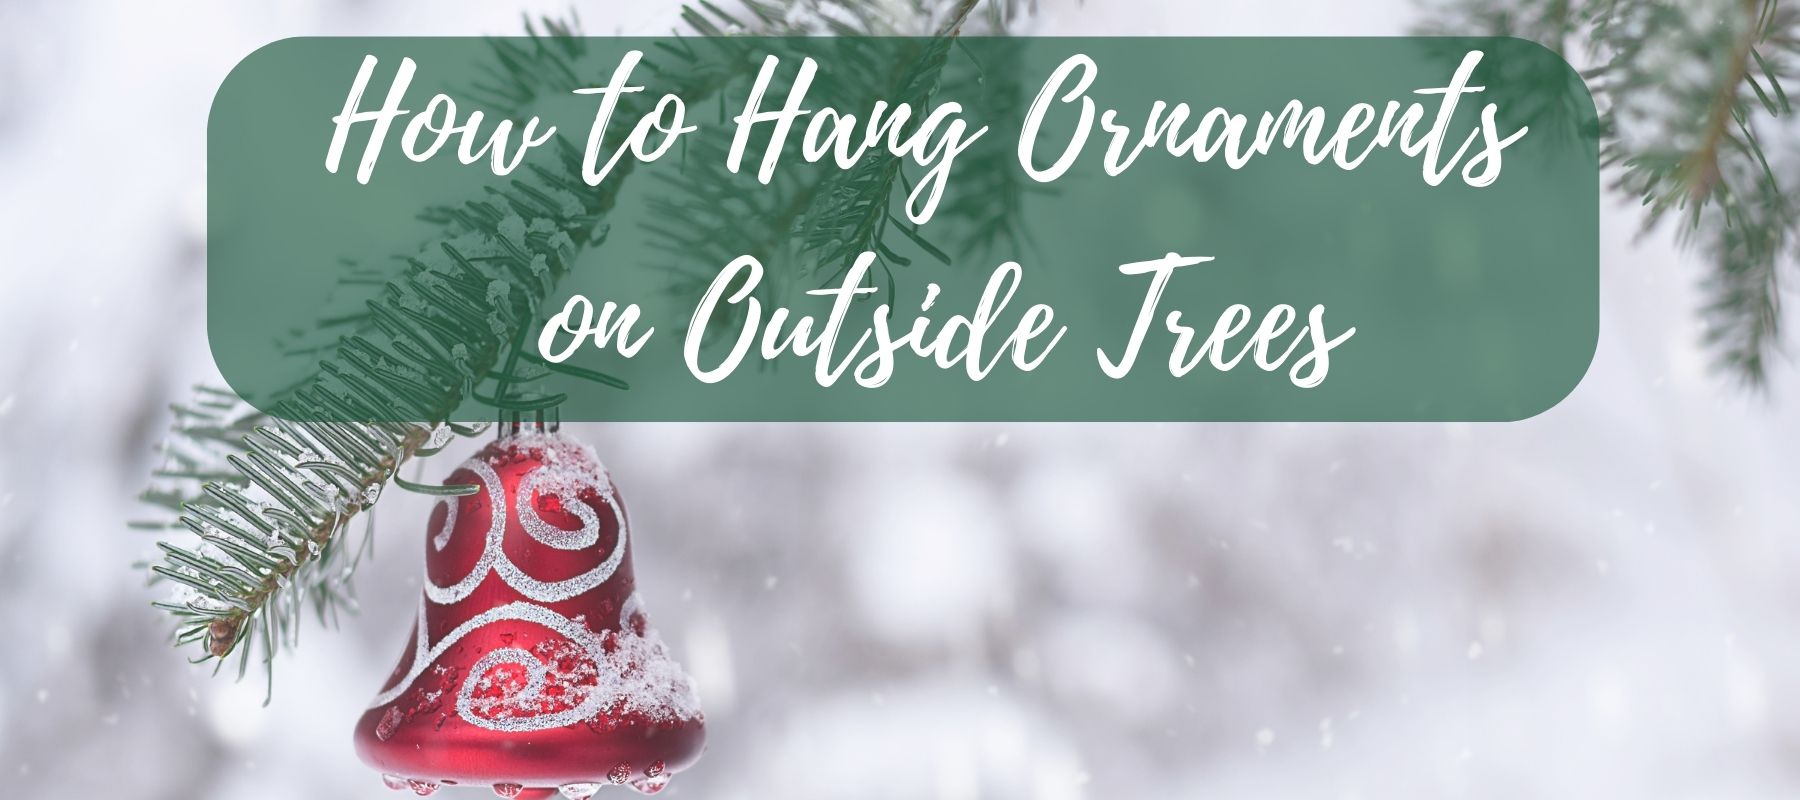 How-to-hang-ornaments-on-outdoor-trees